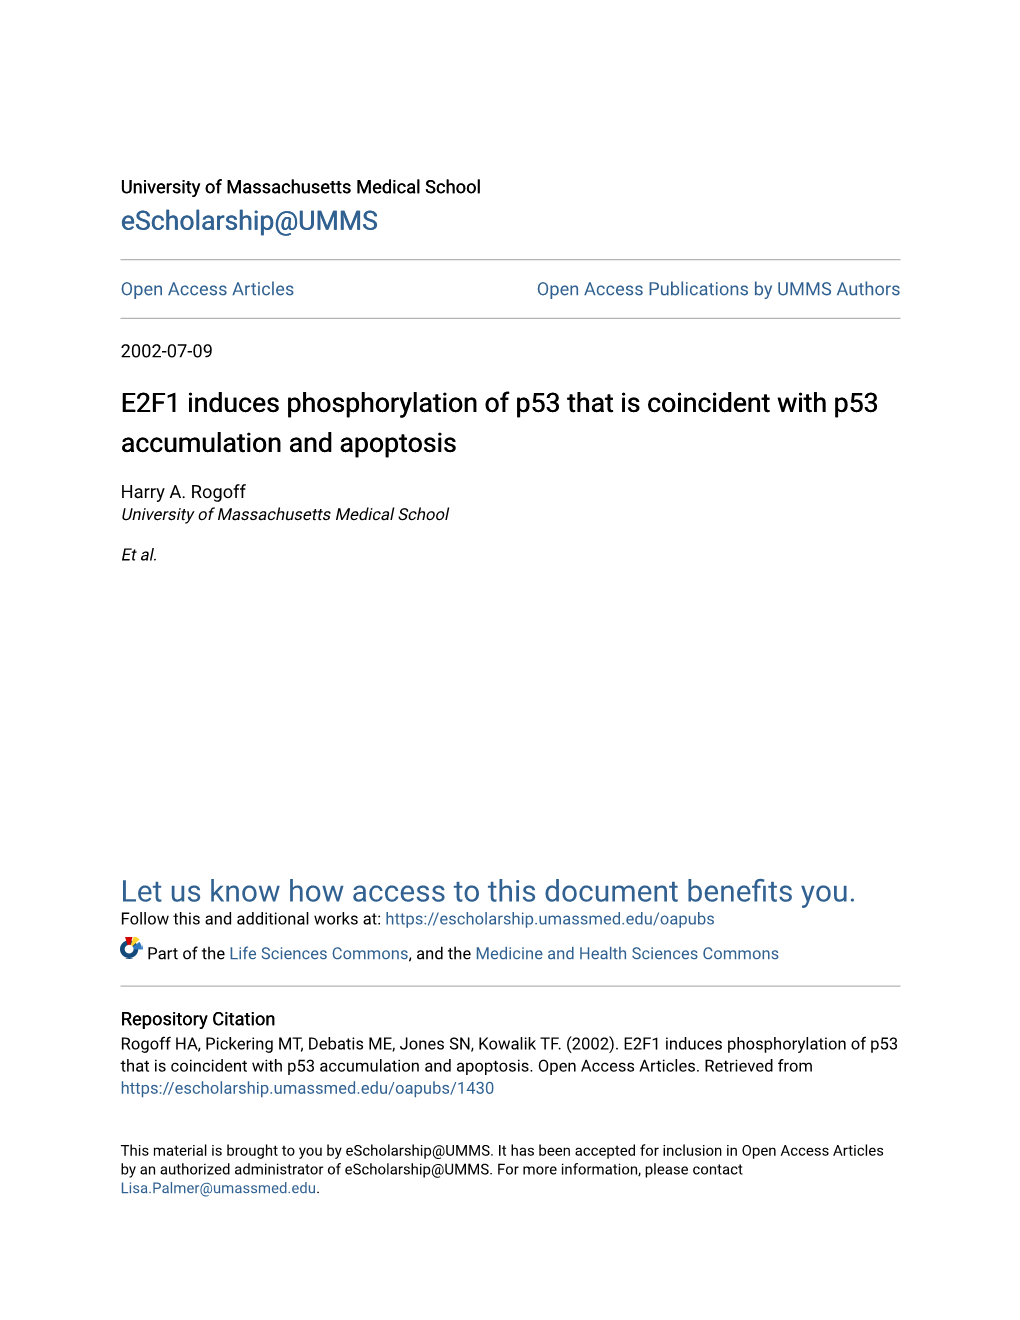 E2F1 Induces Phosphorylation of P53 That Is Coincident with P53 Accumulation and Apoptosis